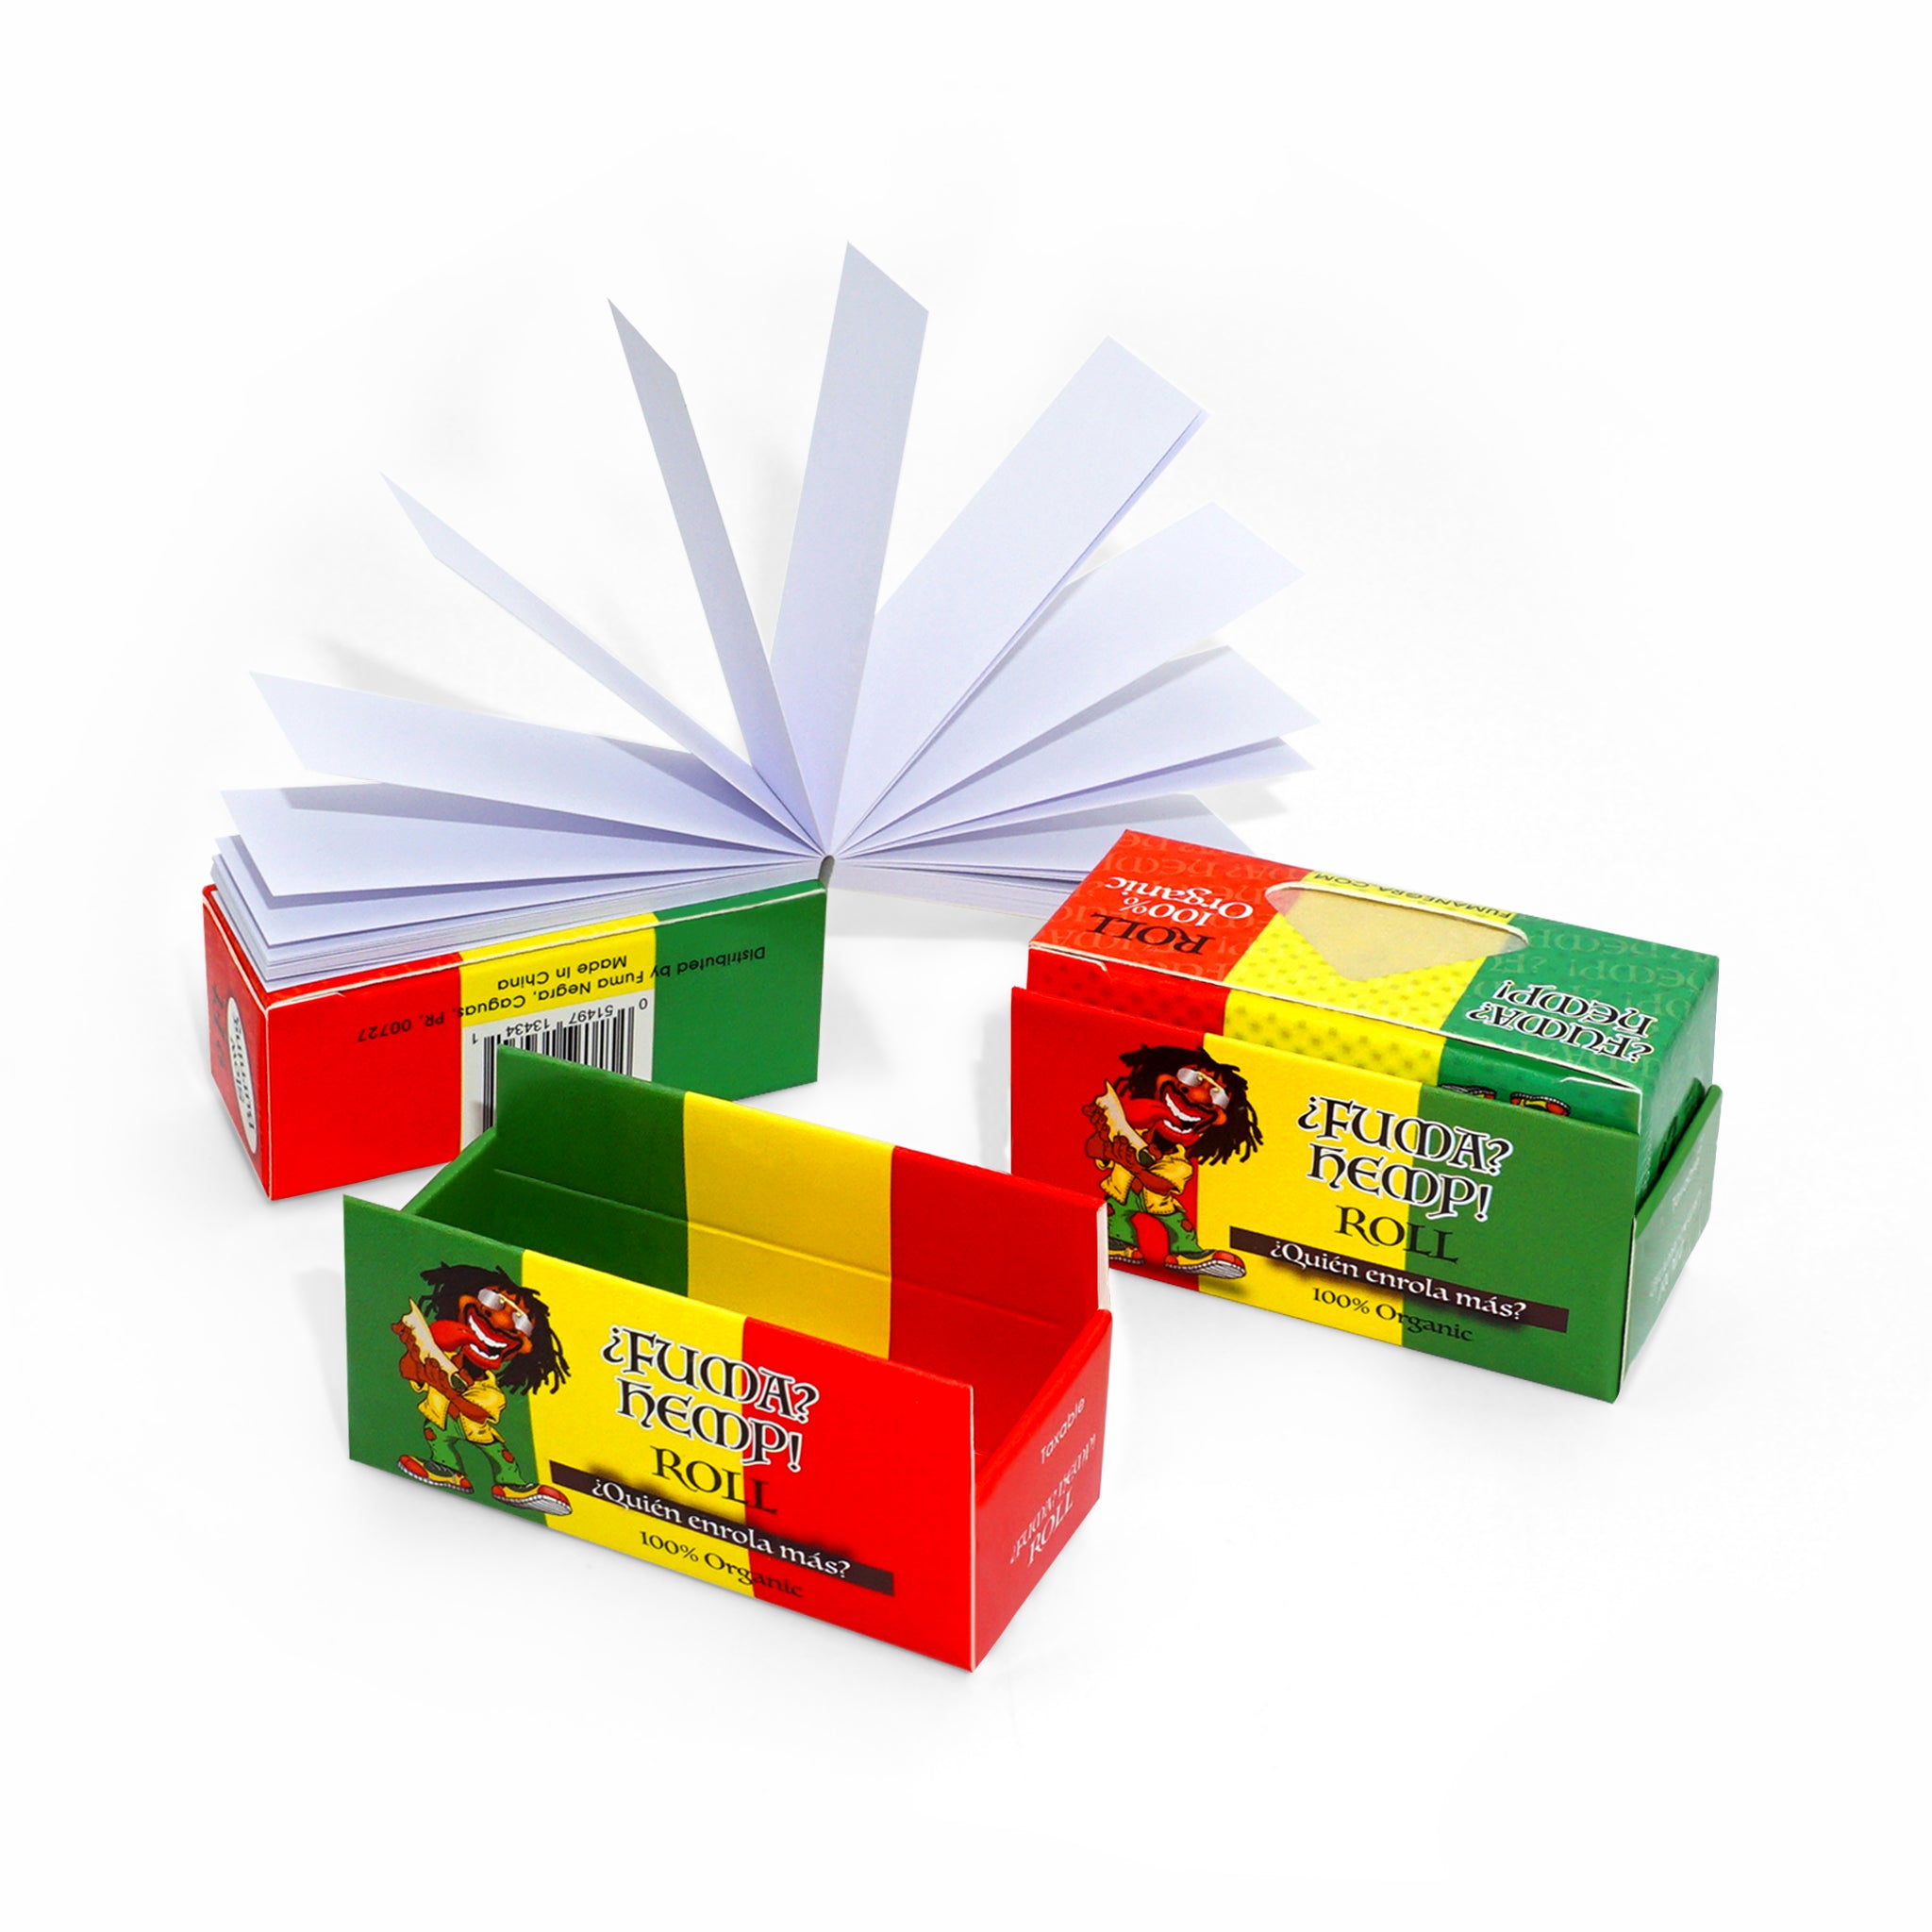 Custom Printed Booklets with Tips in Bobbin Roll Format